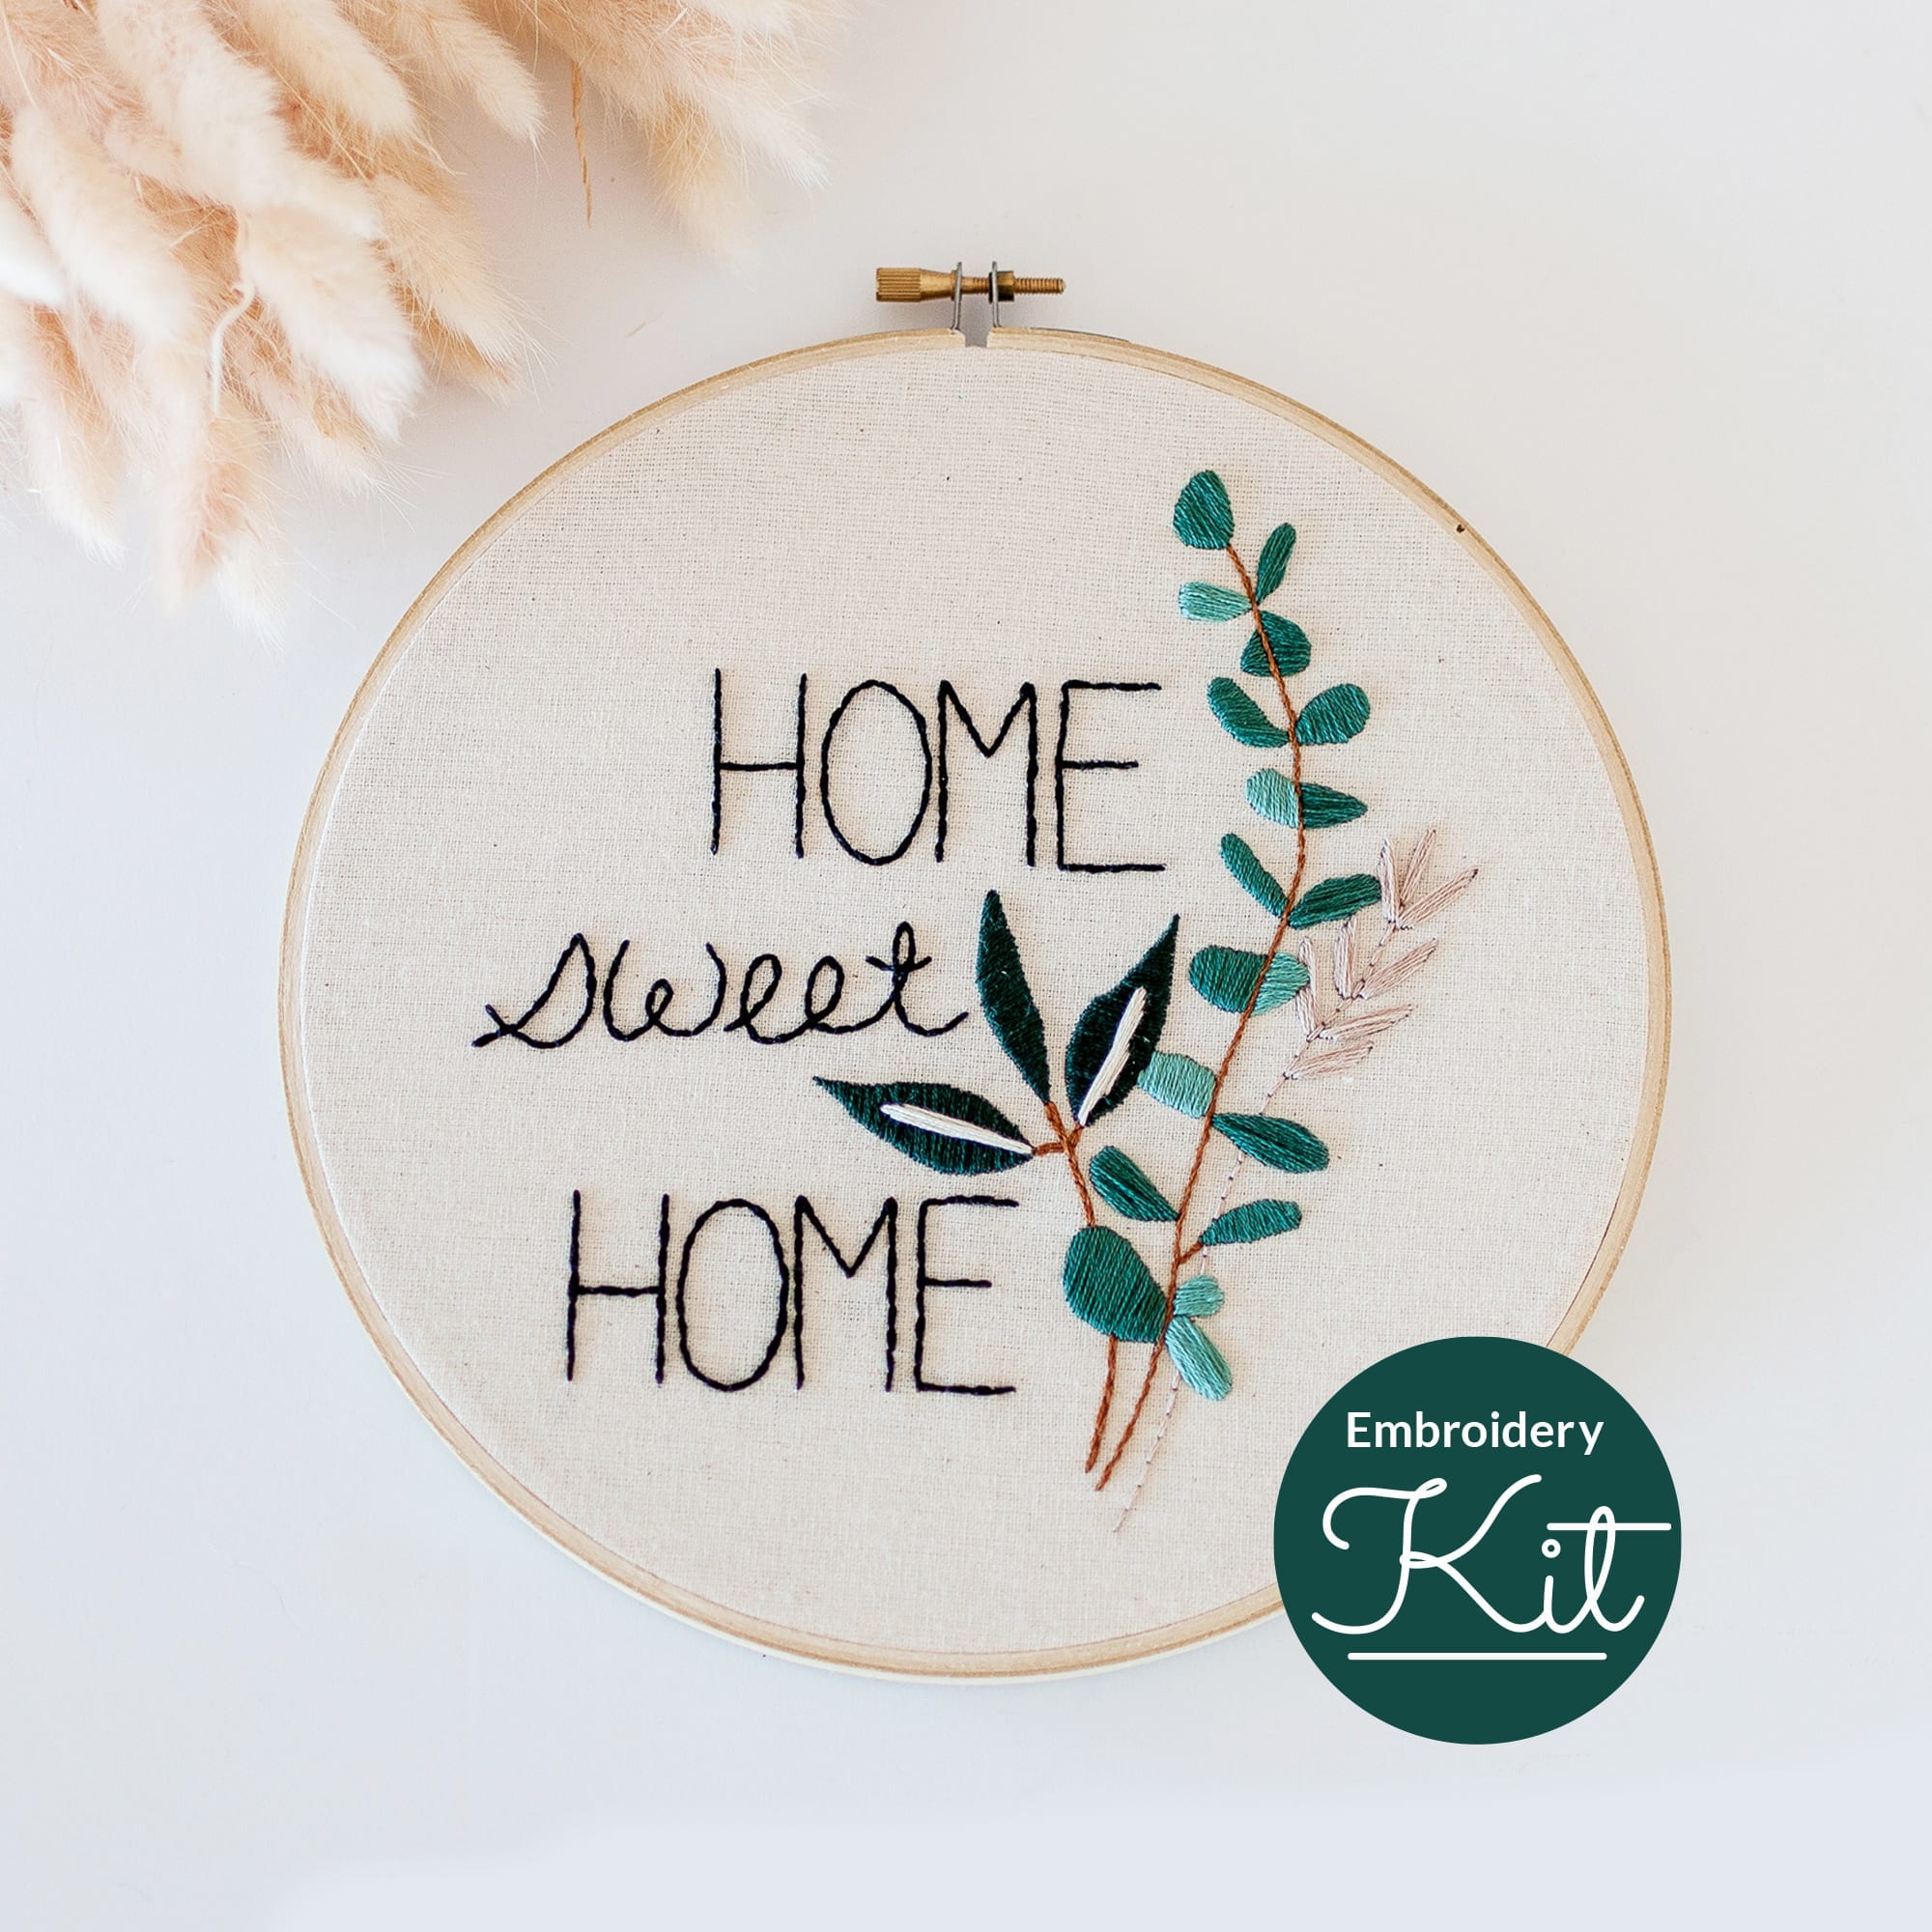 Home Sweet Home Embroidery Kit Brynn & Co.